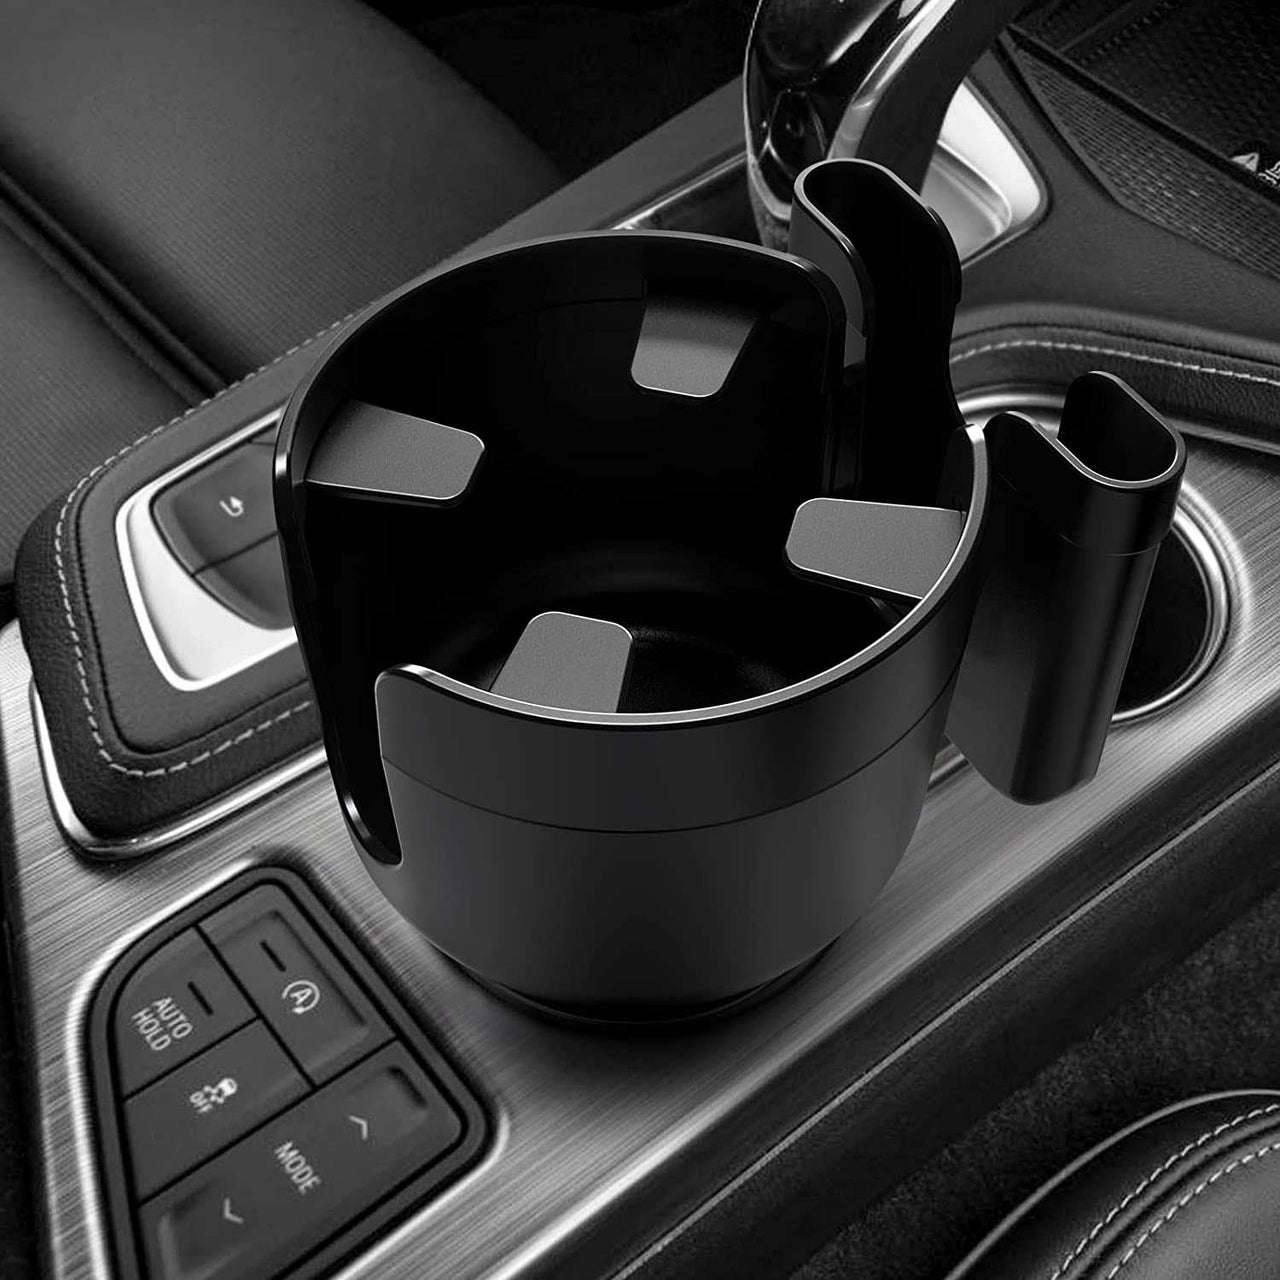 2-in-1 Car Cup Holder Expander Adapter with Adjustable Base, Custom Fit For Your Cars, Car Cup Holder Expander Organizer with Phone Holder, Fits 32/40 oz Drinks Bottles, Car Accessories VE15988